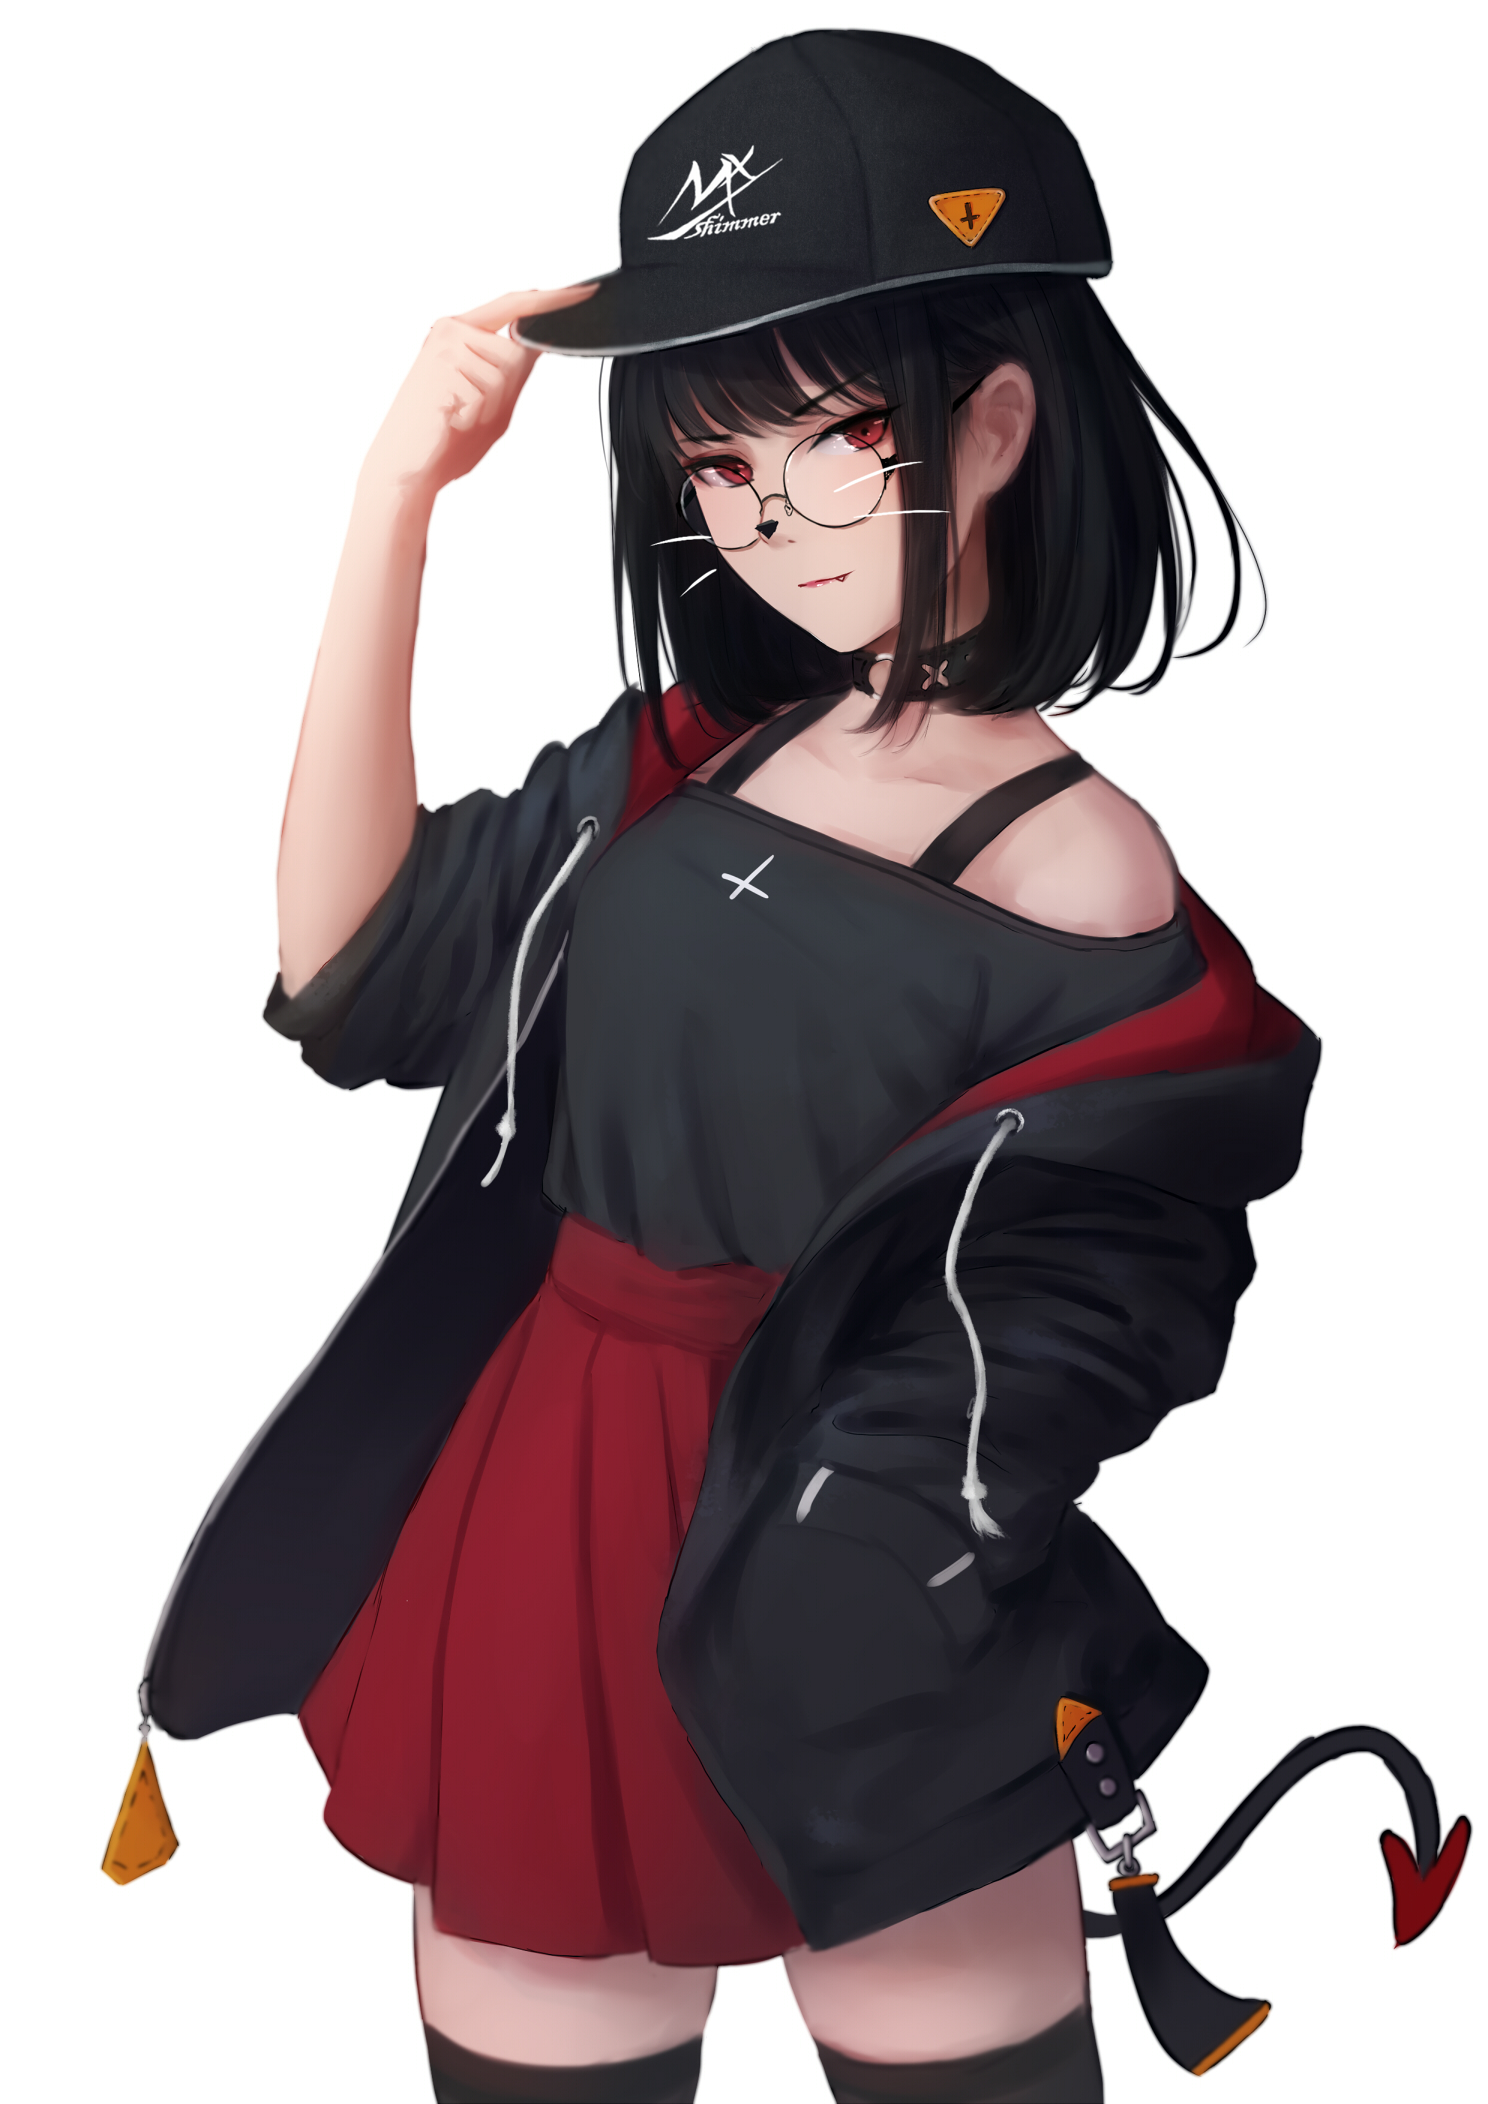 Anime girl with black hair and black eyes